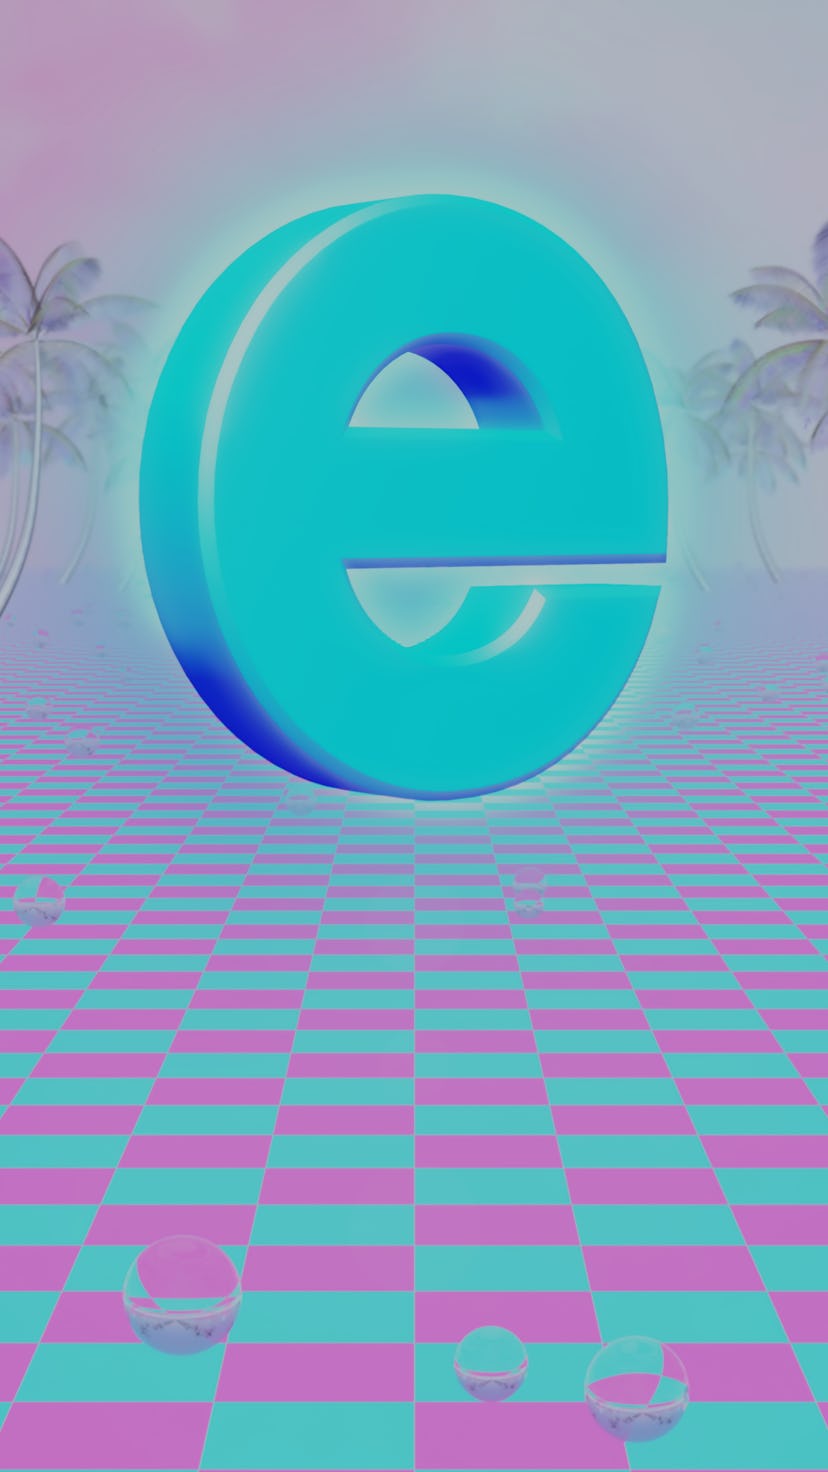 Aesthetic Vaporwave Floating Internet E Logo with Pink Palm Trees 3D Rendering - Abstract Background...